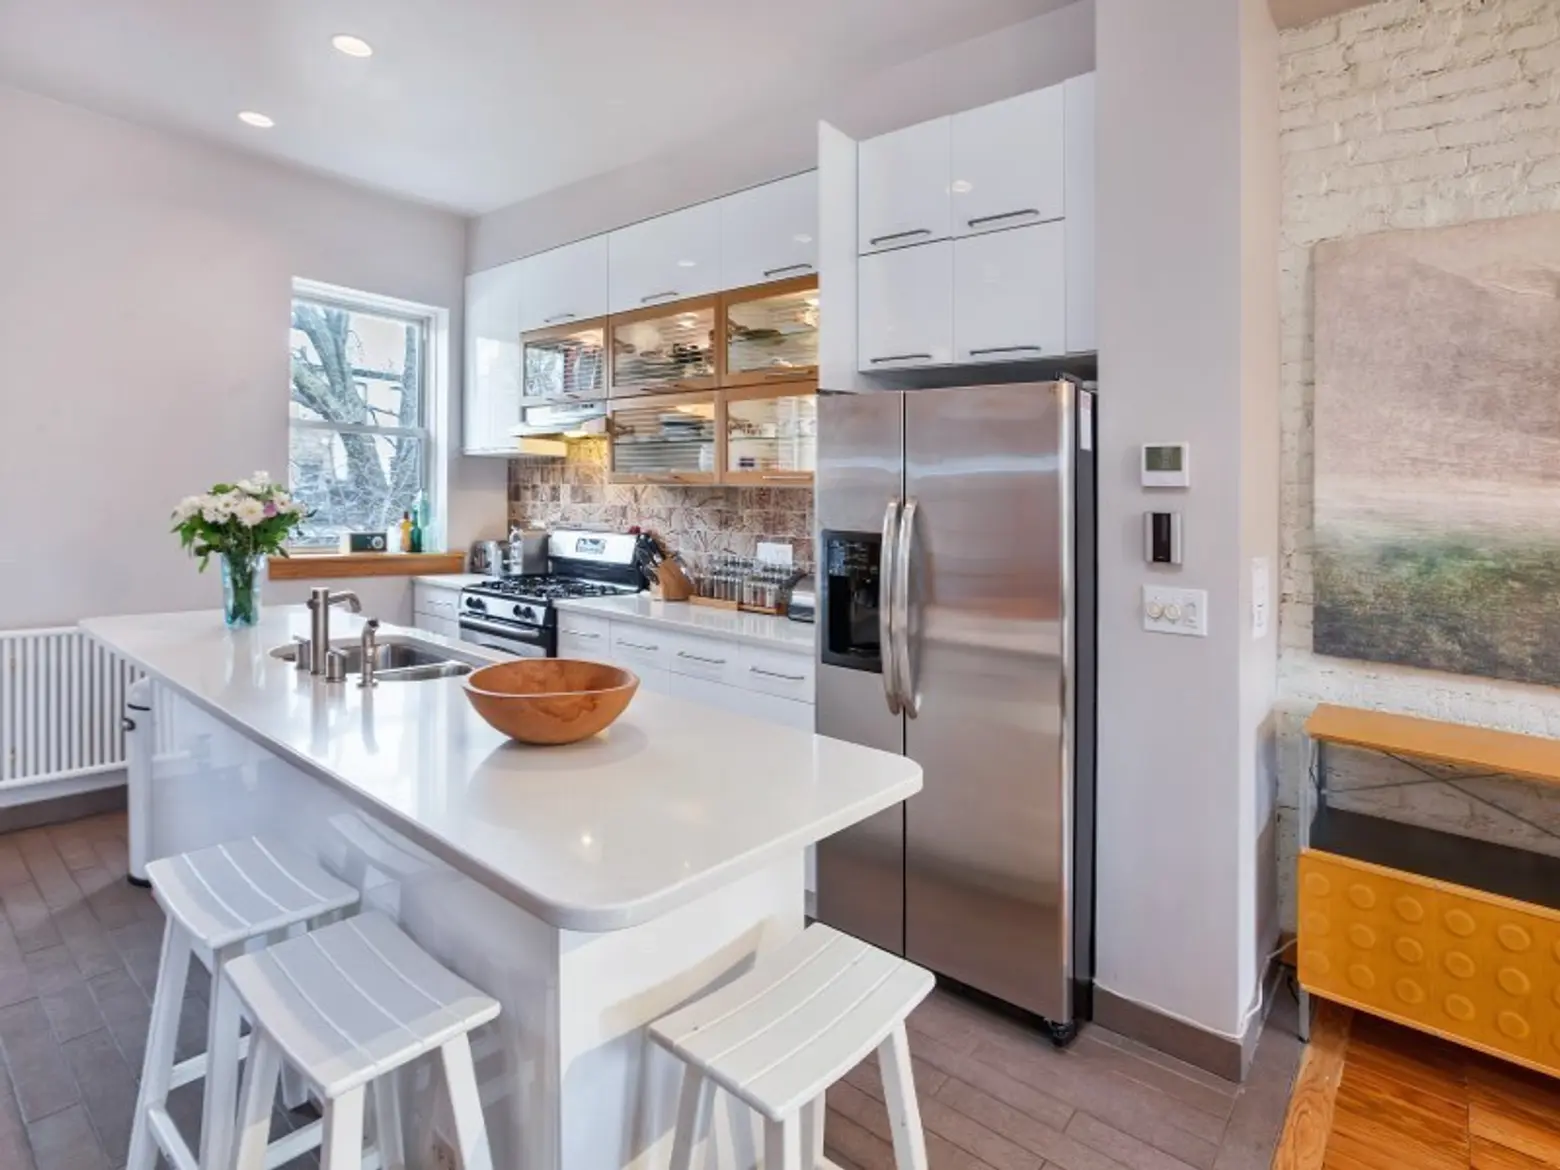 453 Warren Street, Boerum Hill real estate, NYC celebrity real estate, Rose Byrne and Bobby Cannavale